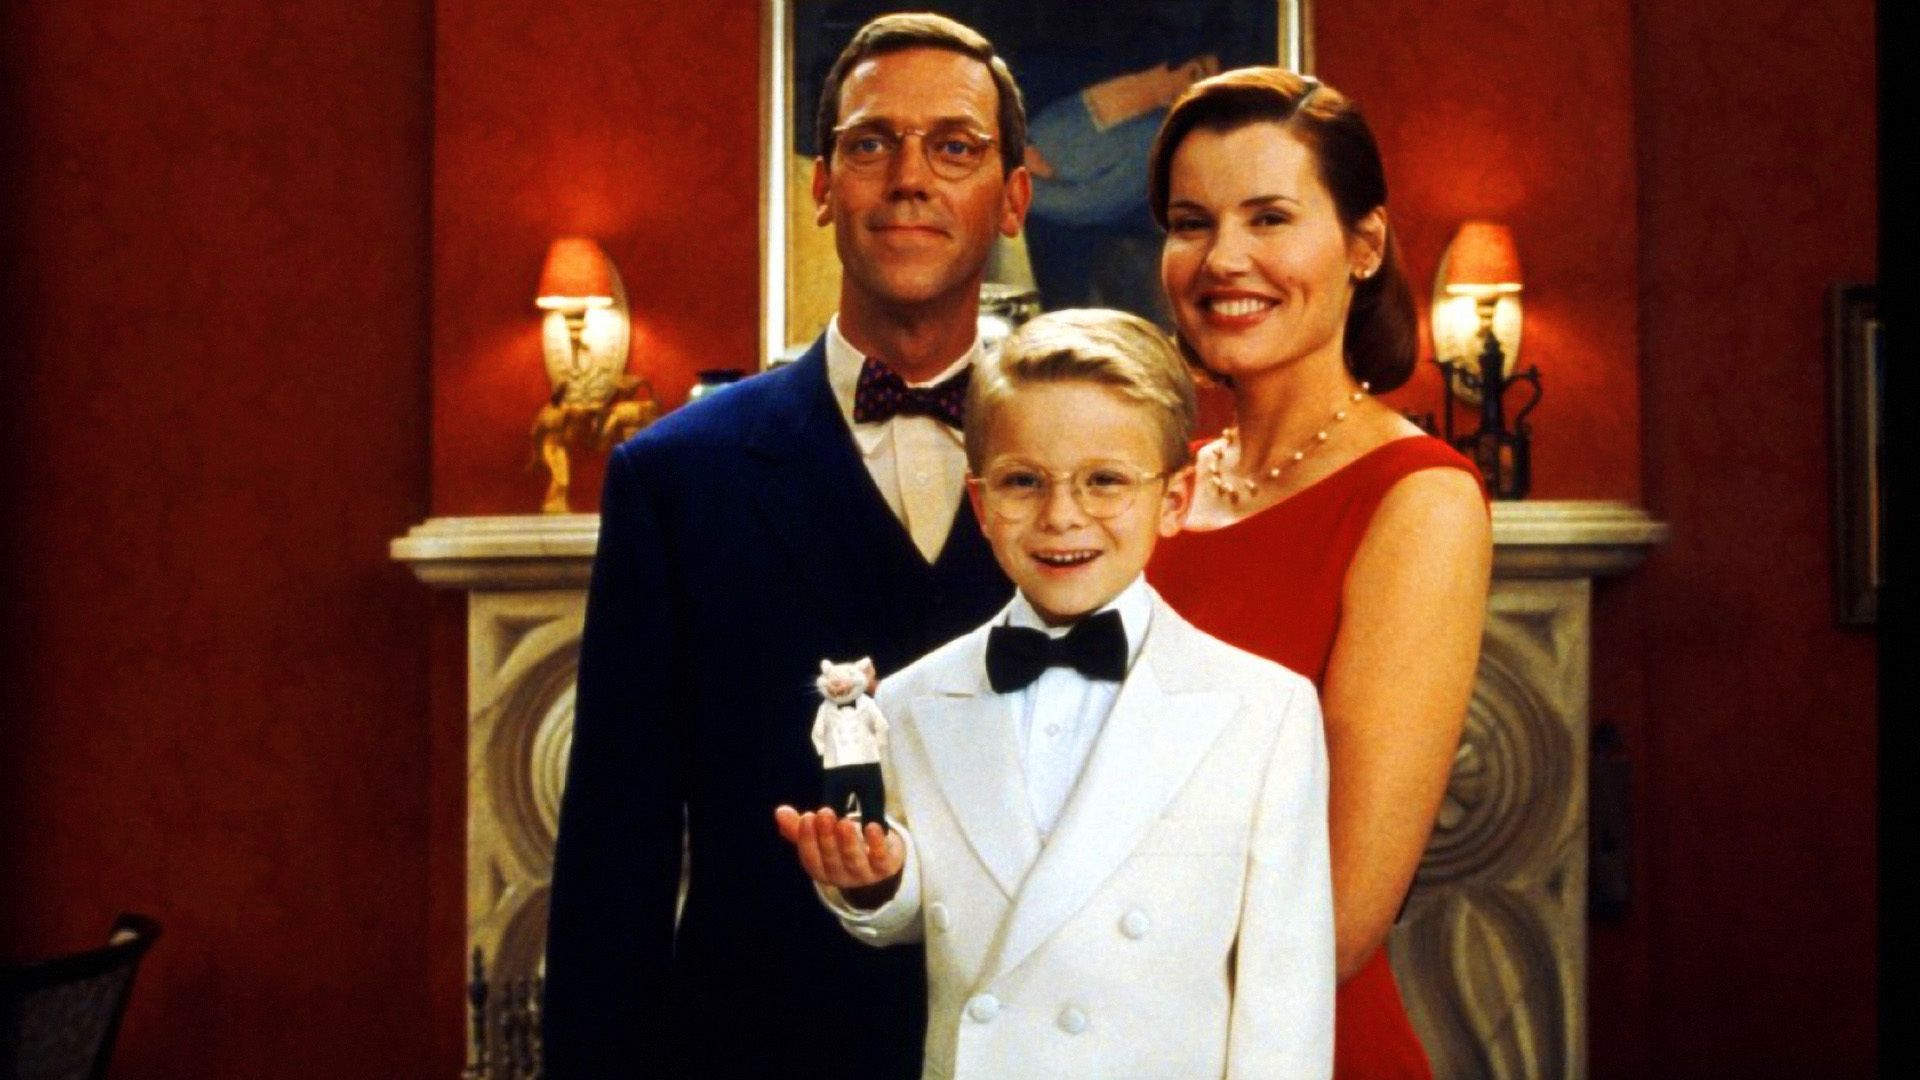 The Little family - Hugh Laurie, Jonathan Lipnicki (with Stuart in his hand) and Geena Davis in Stuart Little (1999)